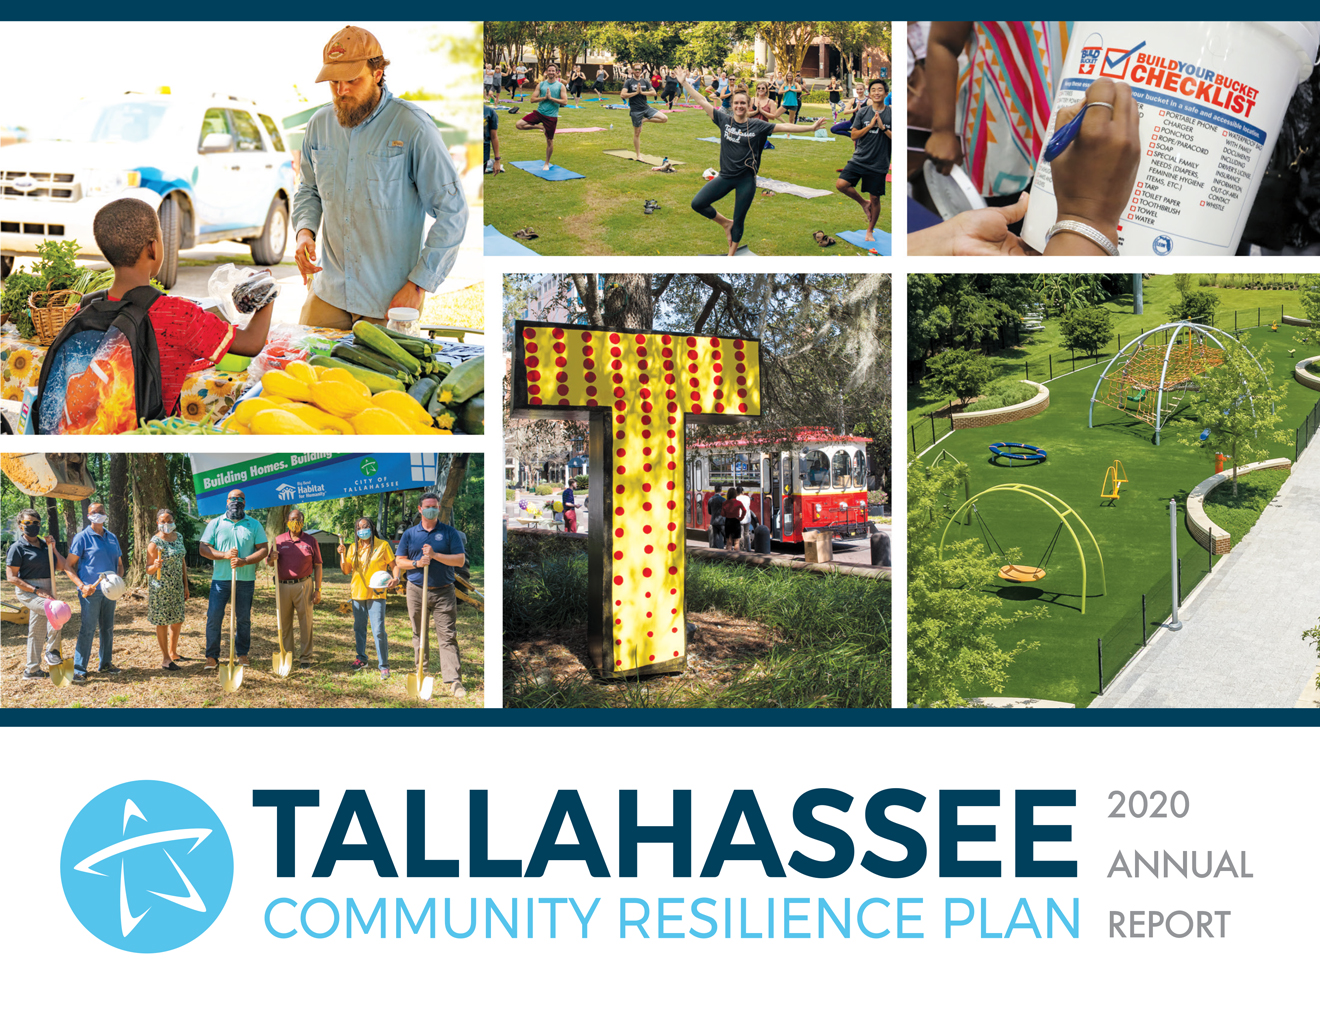 Tallahassee-2020-Resilience-Annual-Report-FINAL09.14.20-1